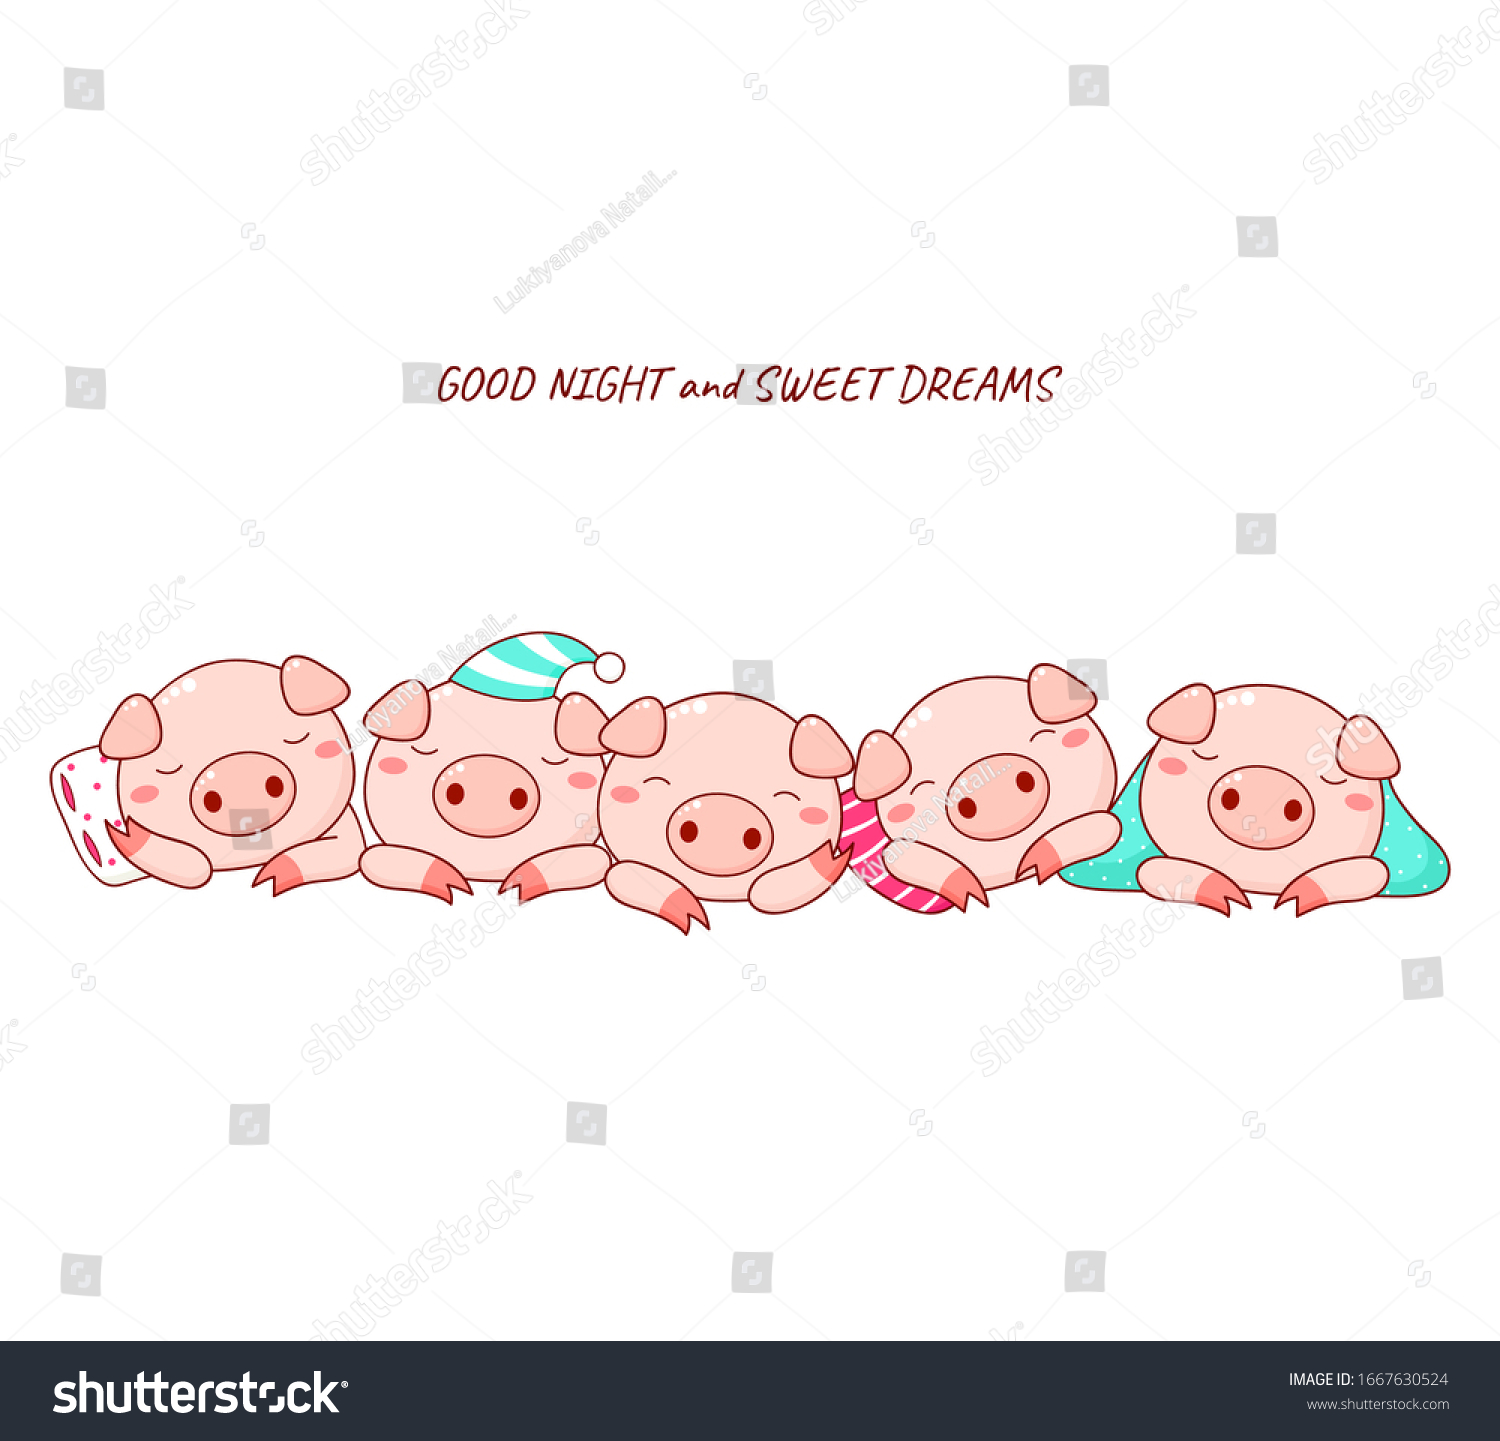 SVG of Good night and sweet dreams. Five cute sleeping pigs in kawaii style. Isolated on white background. Vector EPS8 illustration svg